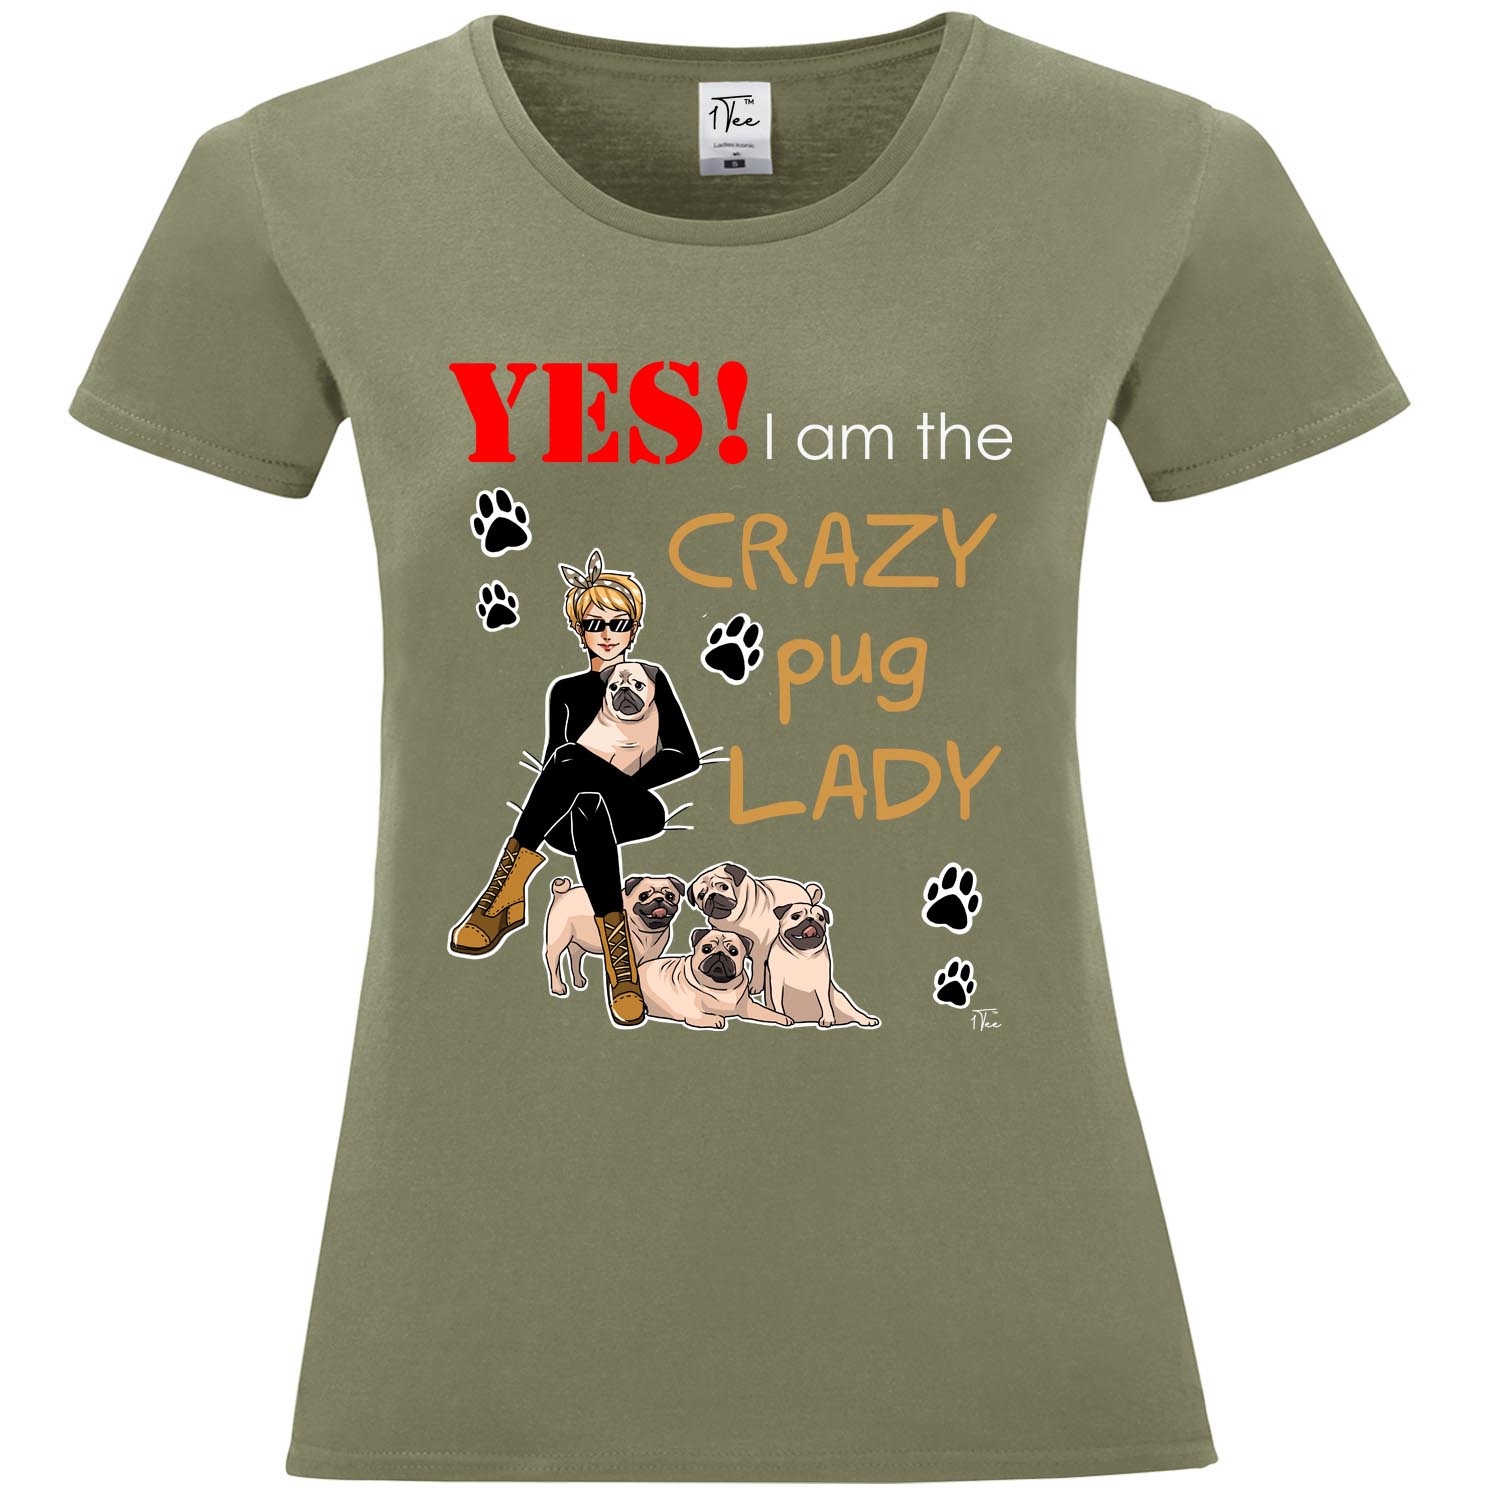 1Tee Womens Loose Fit Crazy Pug Lady T-Shirt 